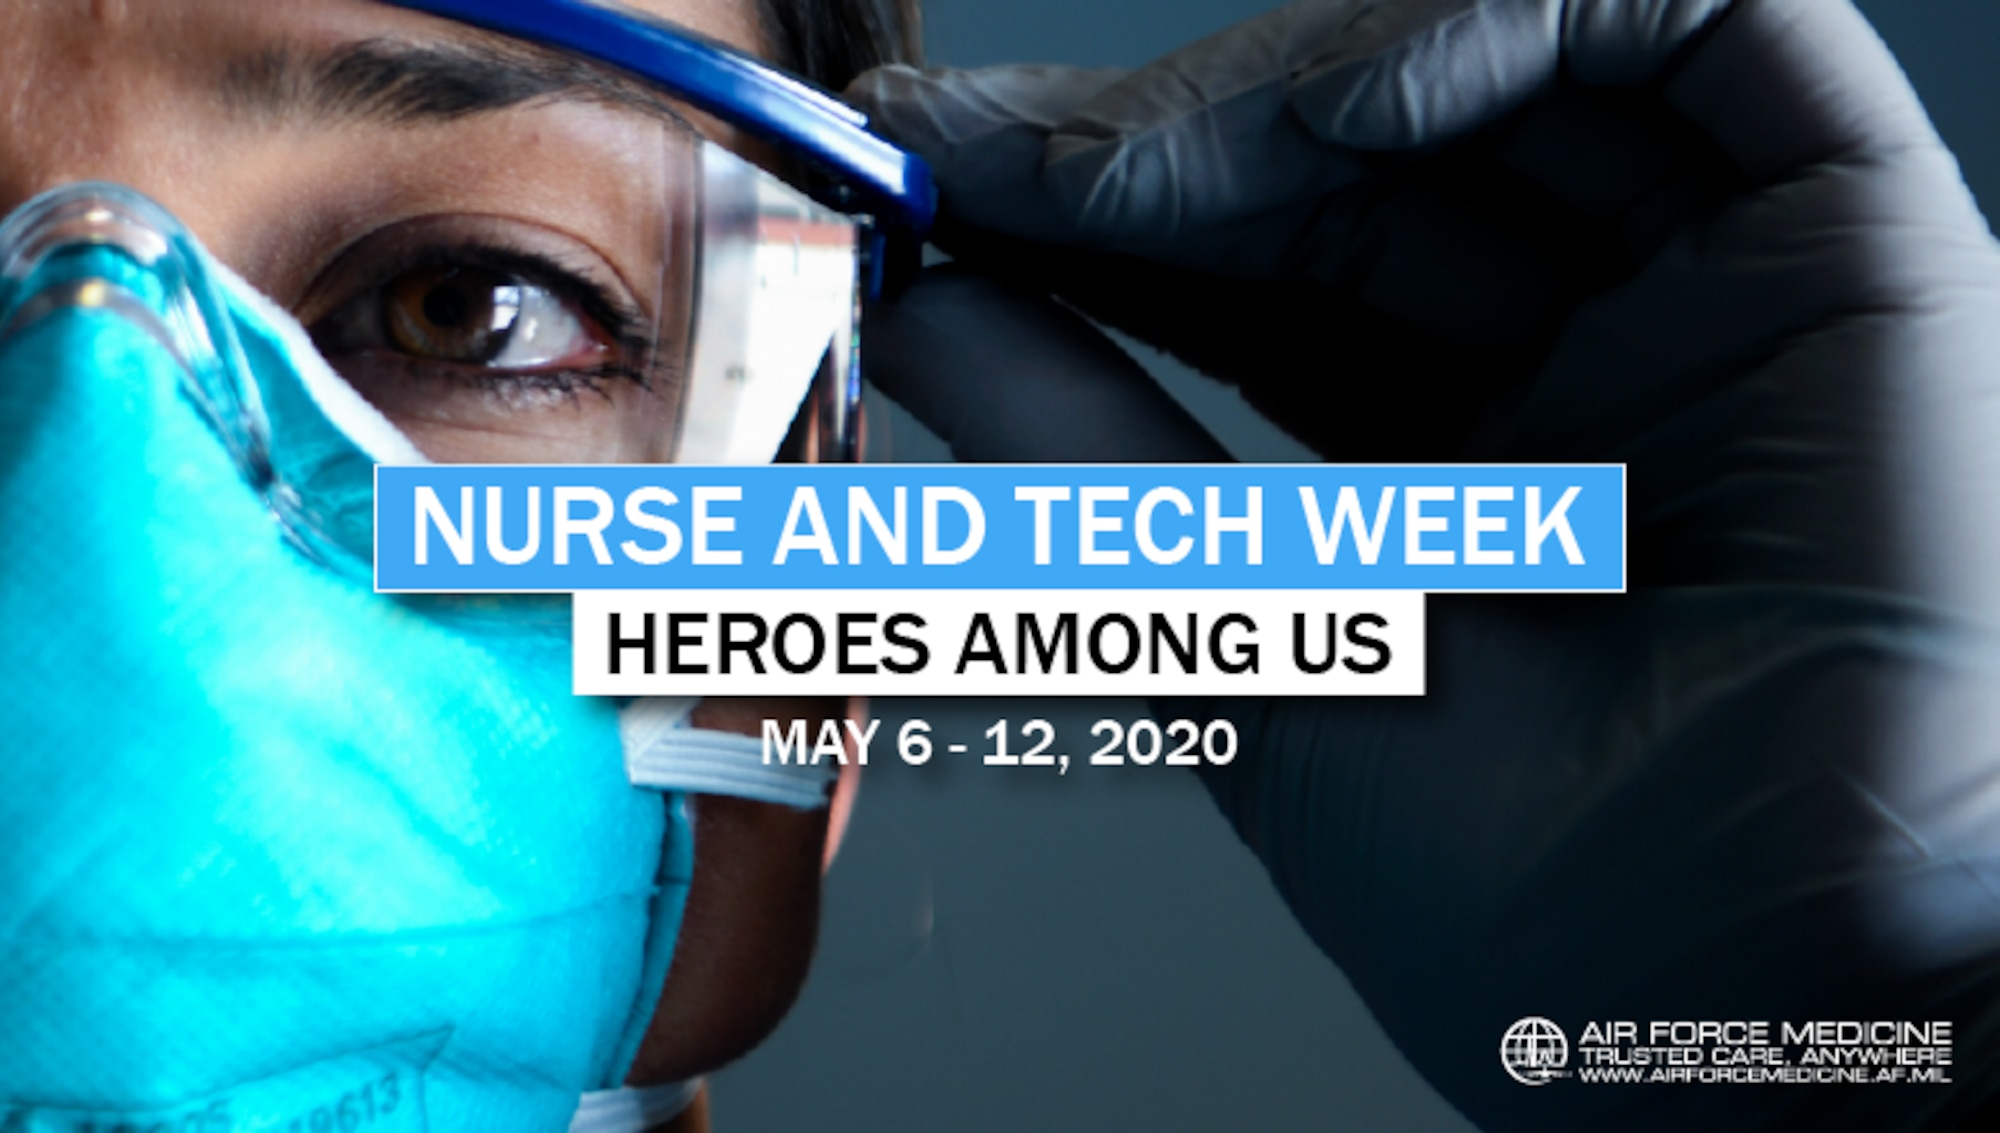 Air Force nurses and medical technicians are answering our nation’s call, and now more than ever, during this pandemic, we know they are heroes one and all. (U.S. Air Force graphic)